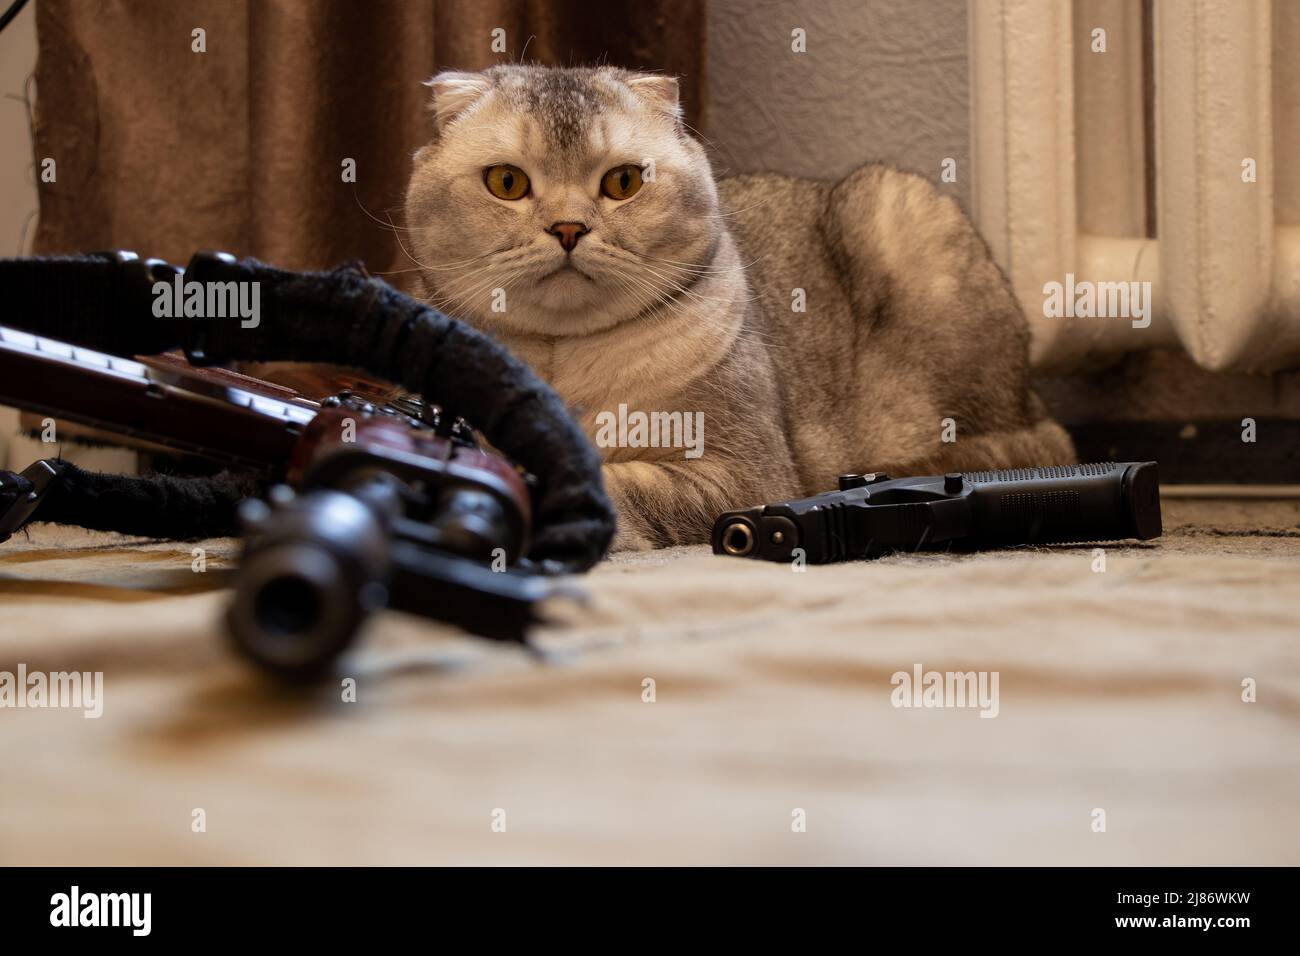 A domestic cat sits near a military machine gun and a pistol in a residential building, house and order protection, military weapons and a cat, war in Stock Photo